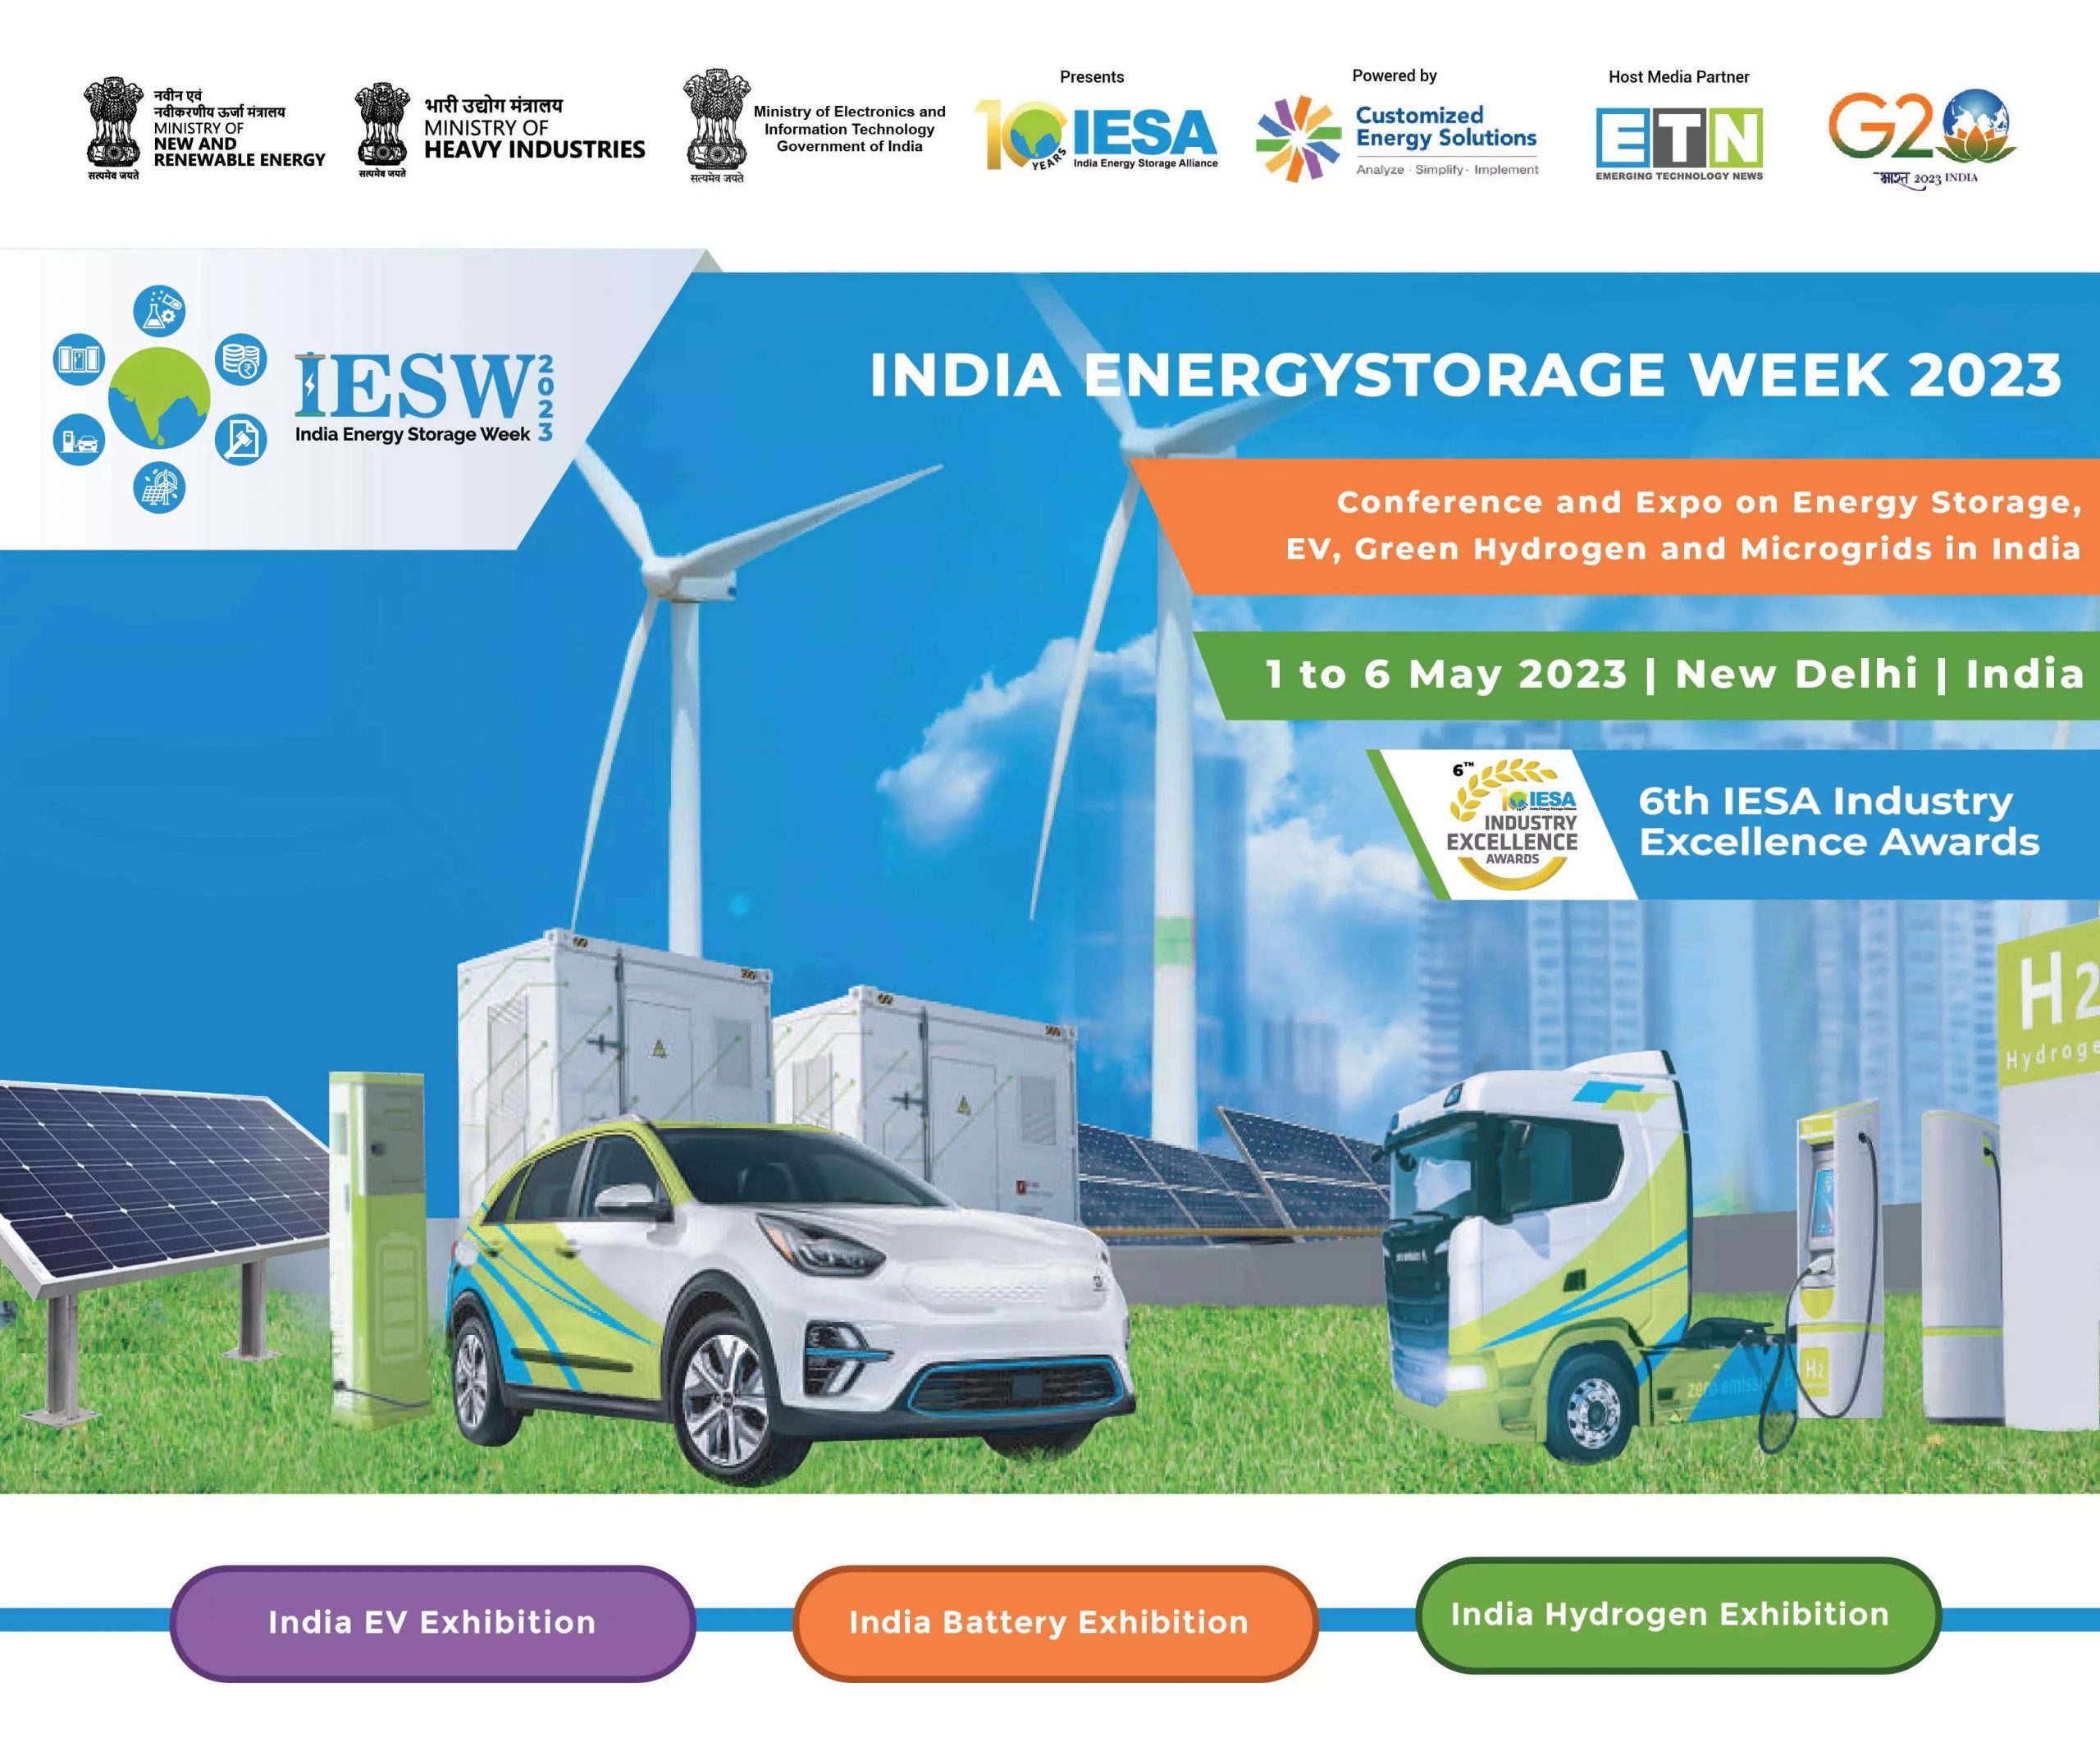 India’s net zero goal takes centre stage at IESW 2023 with participation from over 25 countries, ET EnergyWorld